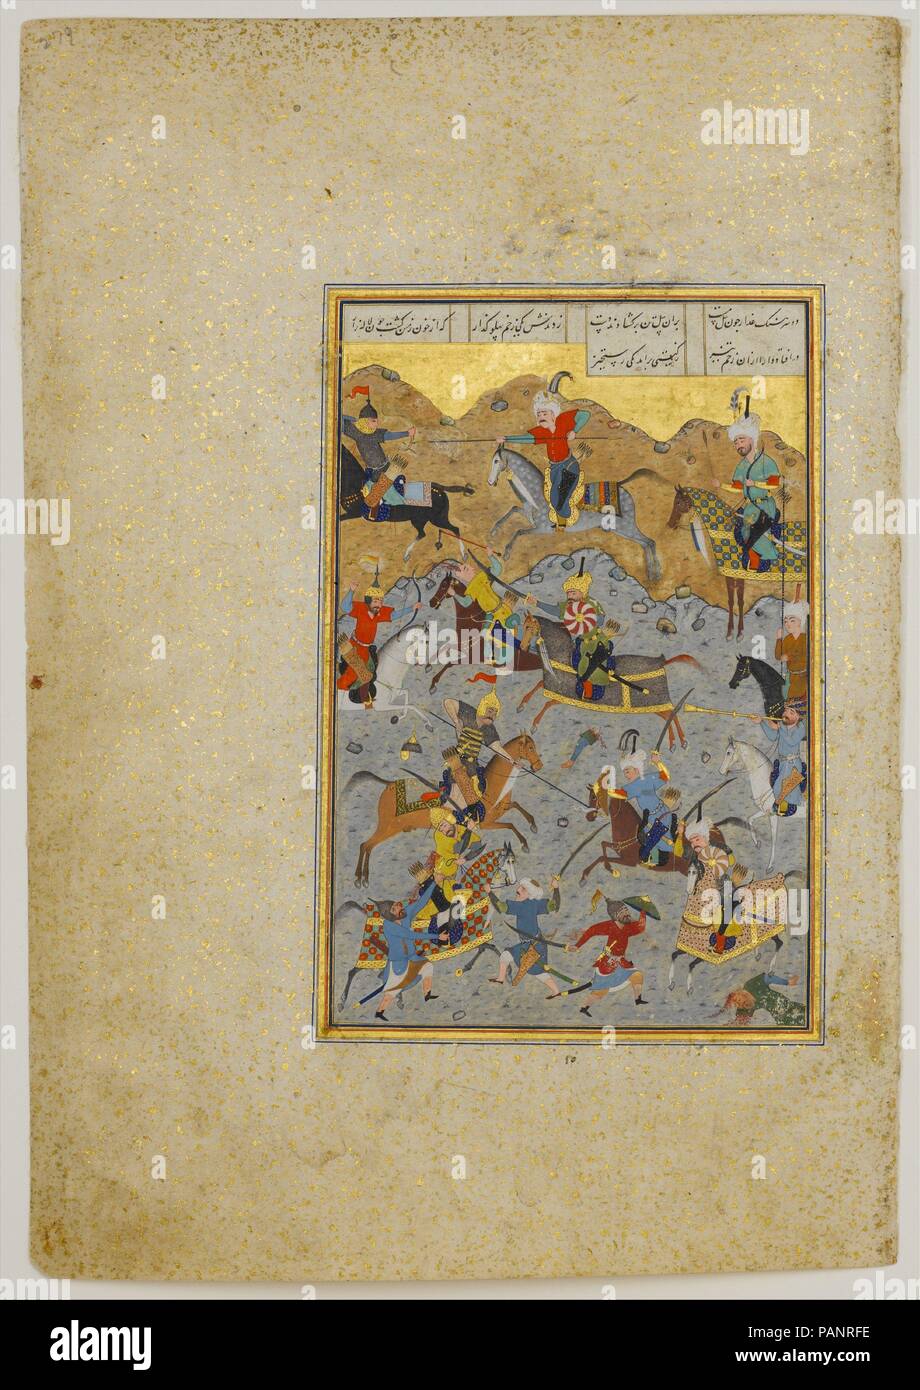 'Battle between Alexander and Darius', Folio from a Khamsa (Quintet) of Nizami. Author: Nizami (Ilyas Abu Muhammad Nizam al-Din of Ganja) (probably 1141-1217). Calligrapher: Sultan Muhammad Nur (ca. 1472-ca. 1536). Dimensions: Painting: H. 7 3/8 in. (18.7 cm)   W. 4 13/16 in. (12.2 cm)  Page: H. 12 5/8 in. (32.1 cm)   W. 8 3/4 in. (22.2 cm)  Mat: H. 19 1/4 in. (48.9 cm)   W. 14 1/4 in. (36.2 cm). Date: A.H. 931/A.D. 1524-25.  This razm (battle) scene is set against a hilly background, with groups of figures engaged in combat. Three figures in the foreground attack their mounted enemies. A seve Stock Photo